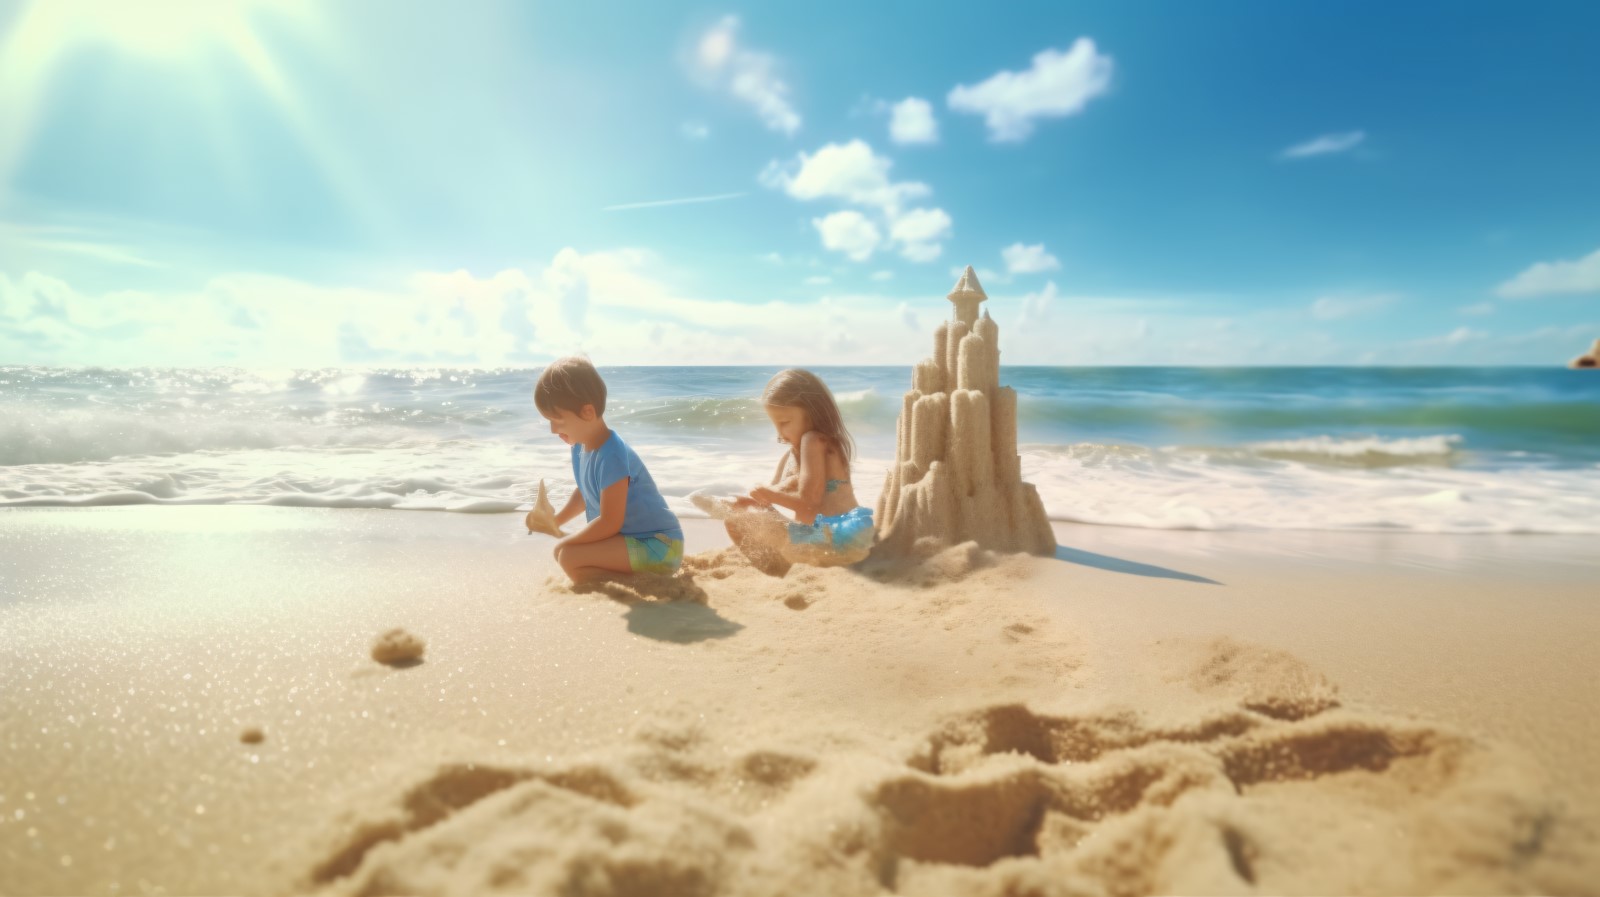 Kids playing with sand in beach scene 237